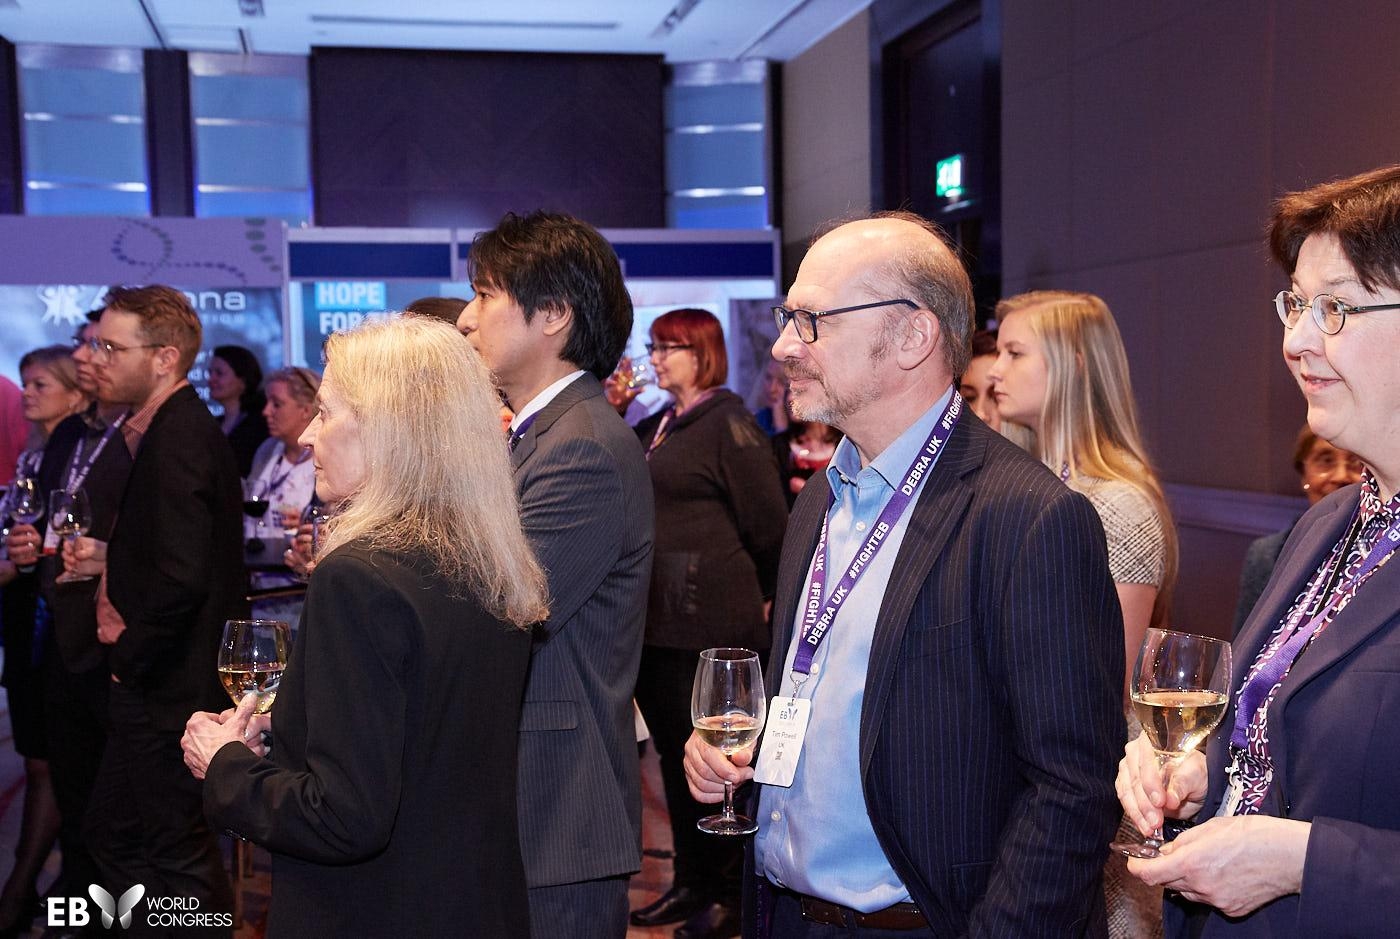 welcome reception, meetings, side fora, events, EB2020, EB Congress, EB World Congress, Blisters, Genetic, Skin, Wounds